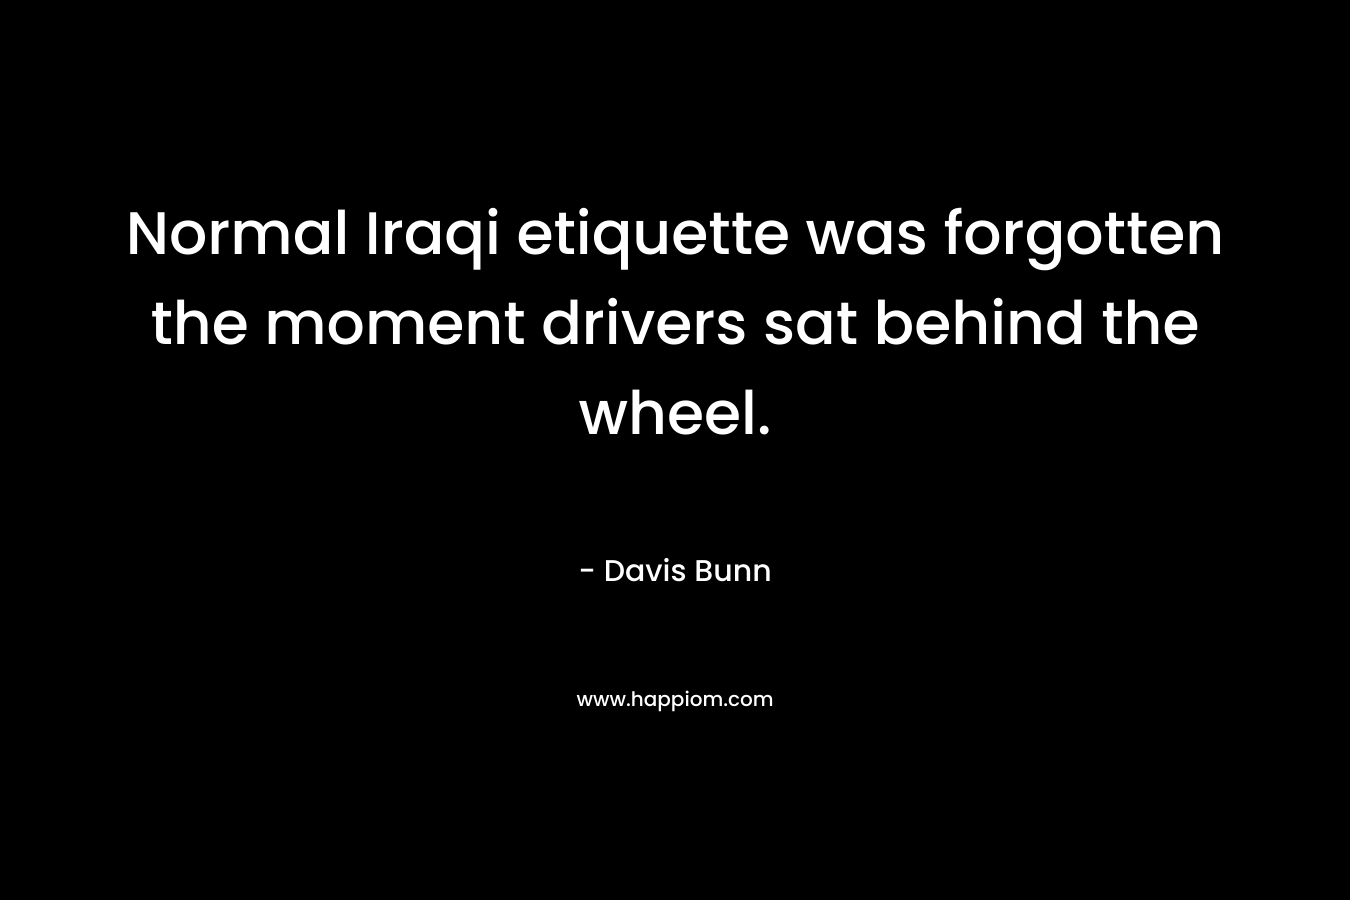 Normal Iraqi etiquette was forgotten the moment drivers sat behind the wheel.